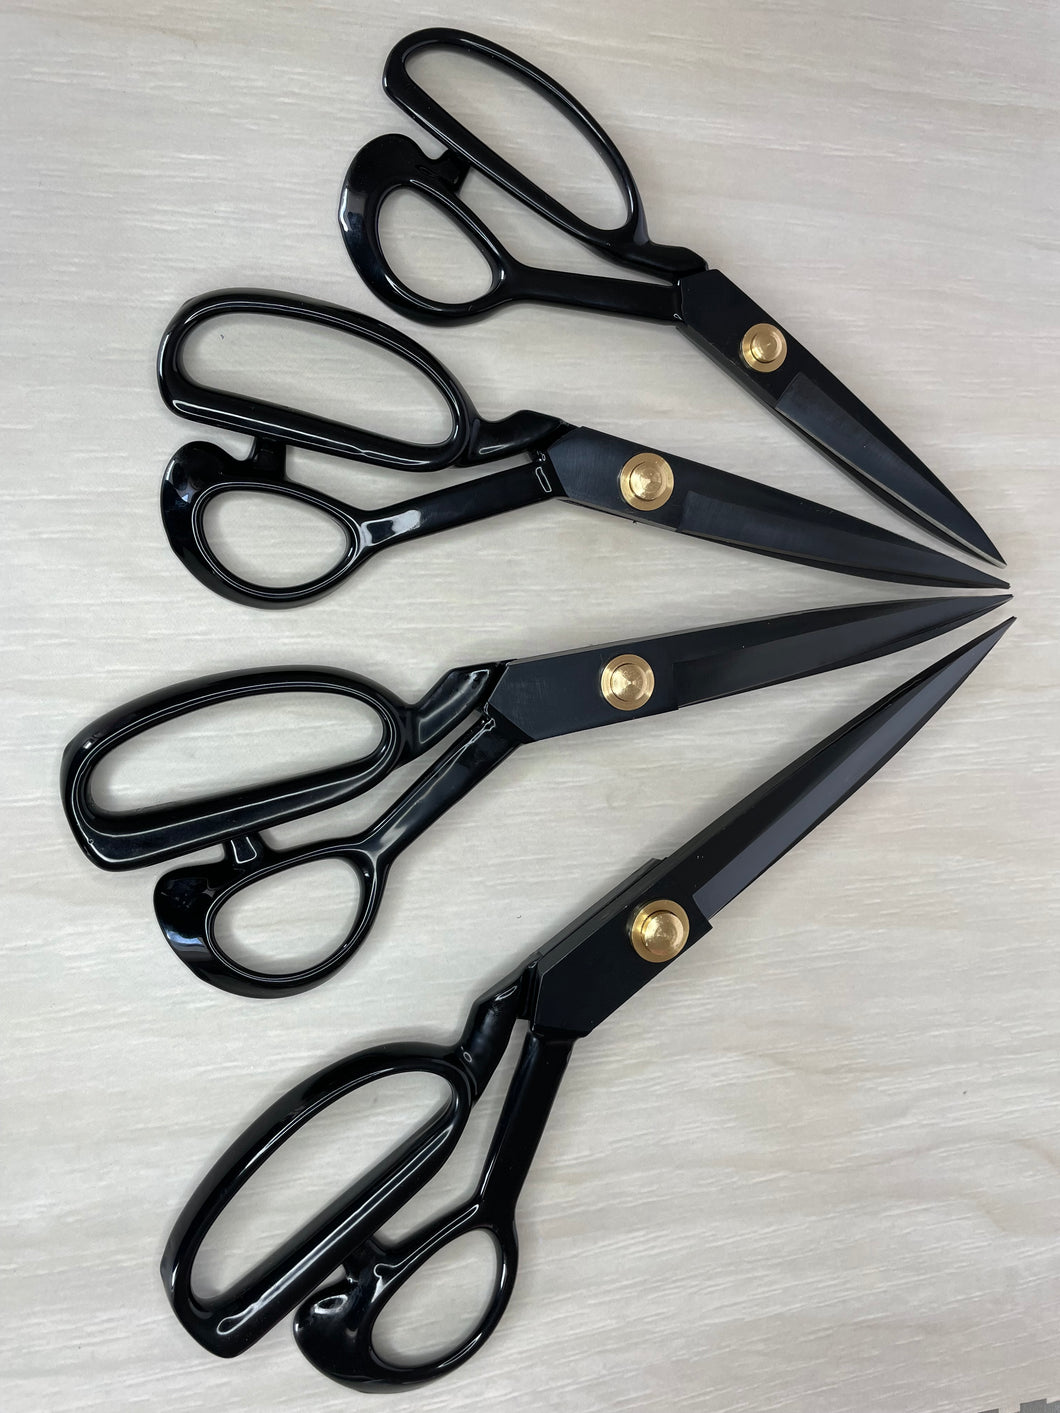 10 Inch Tailor's Shears